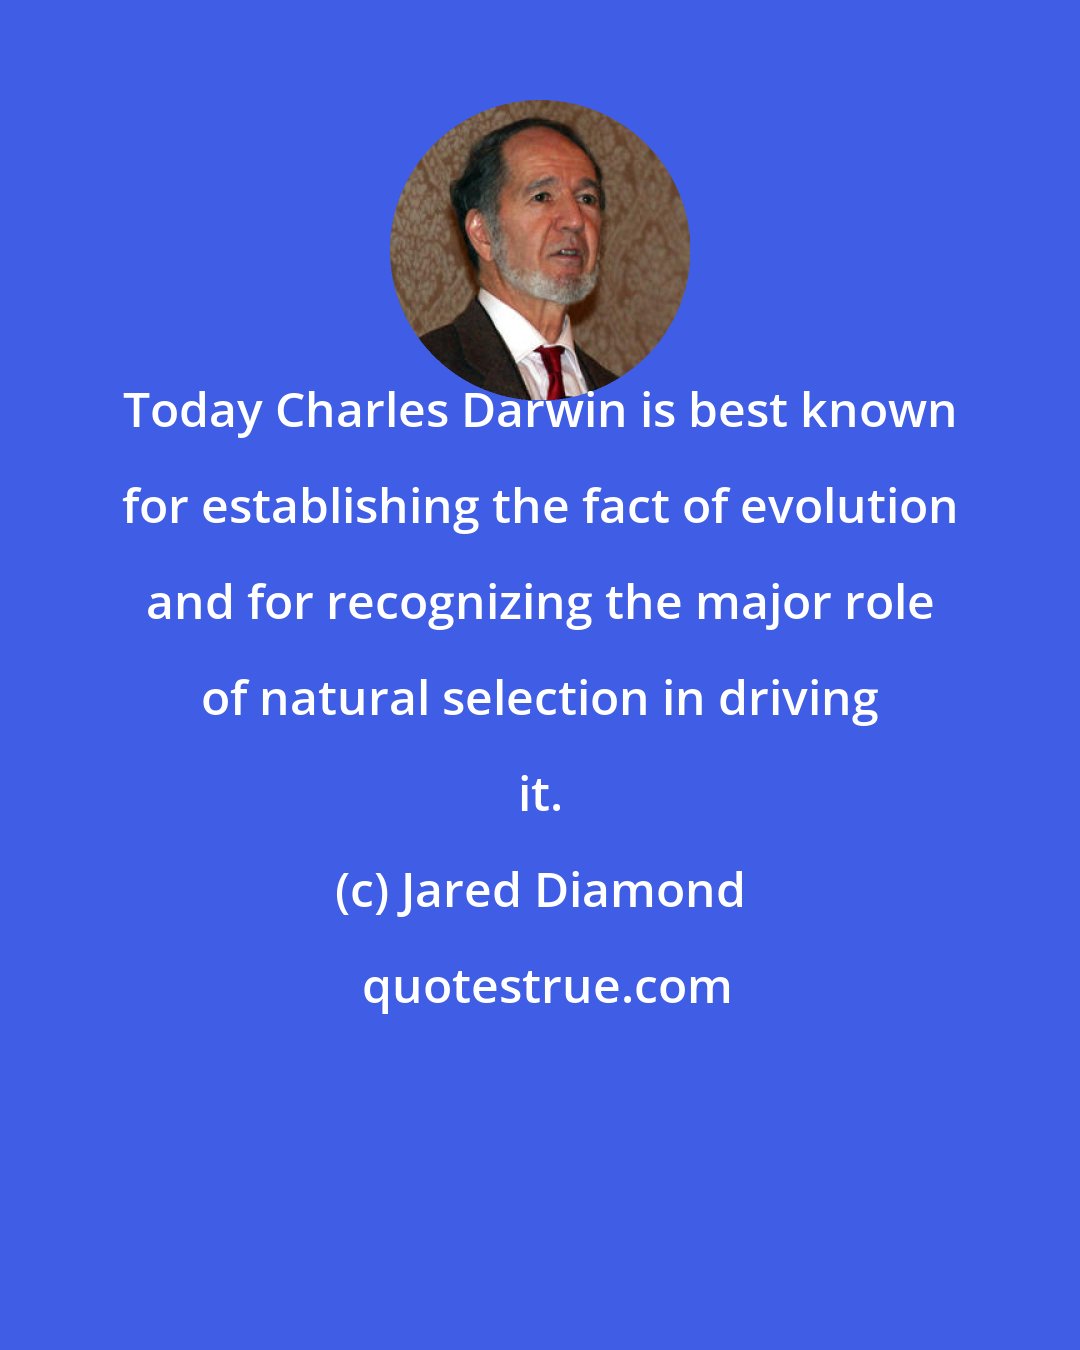 Jared Diamond: Today Charles Darwin is best known for establishing the fact of evolution and for recognizing the major role of natural selection in driving it.